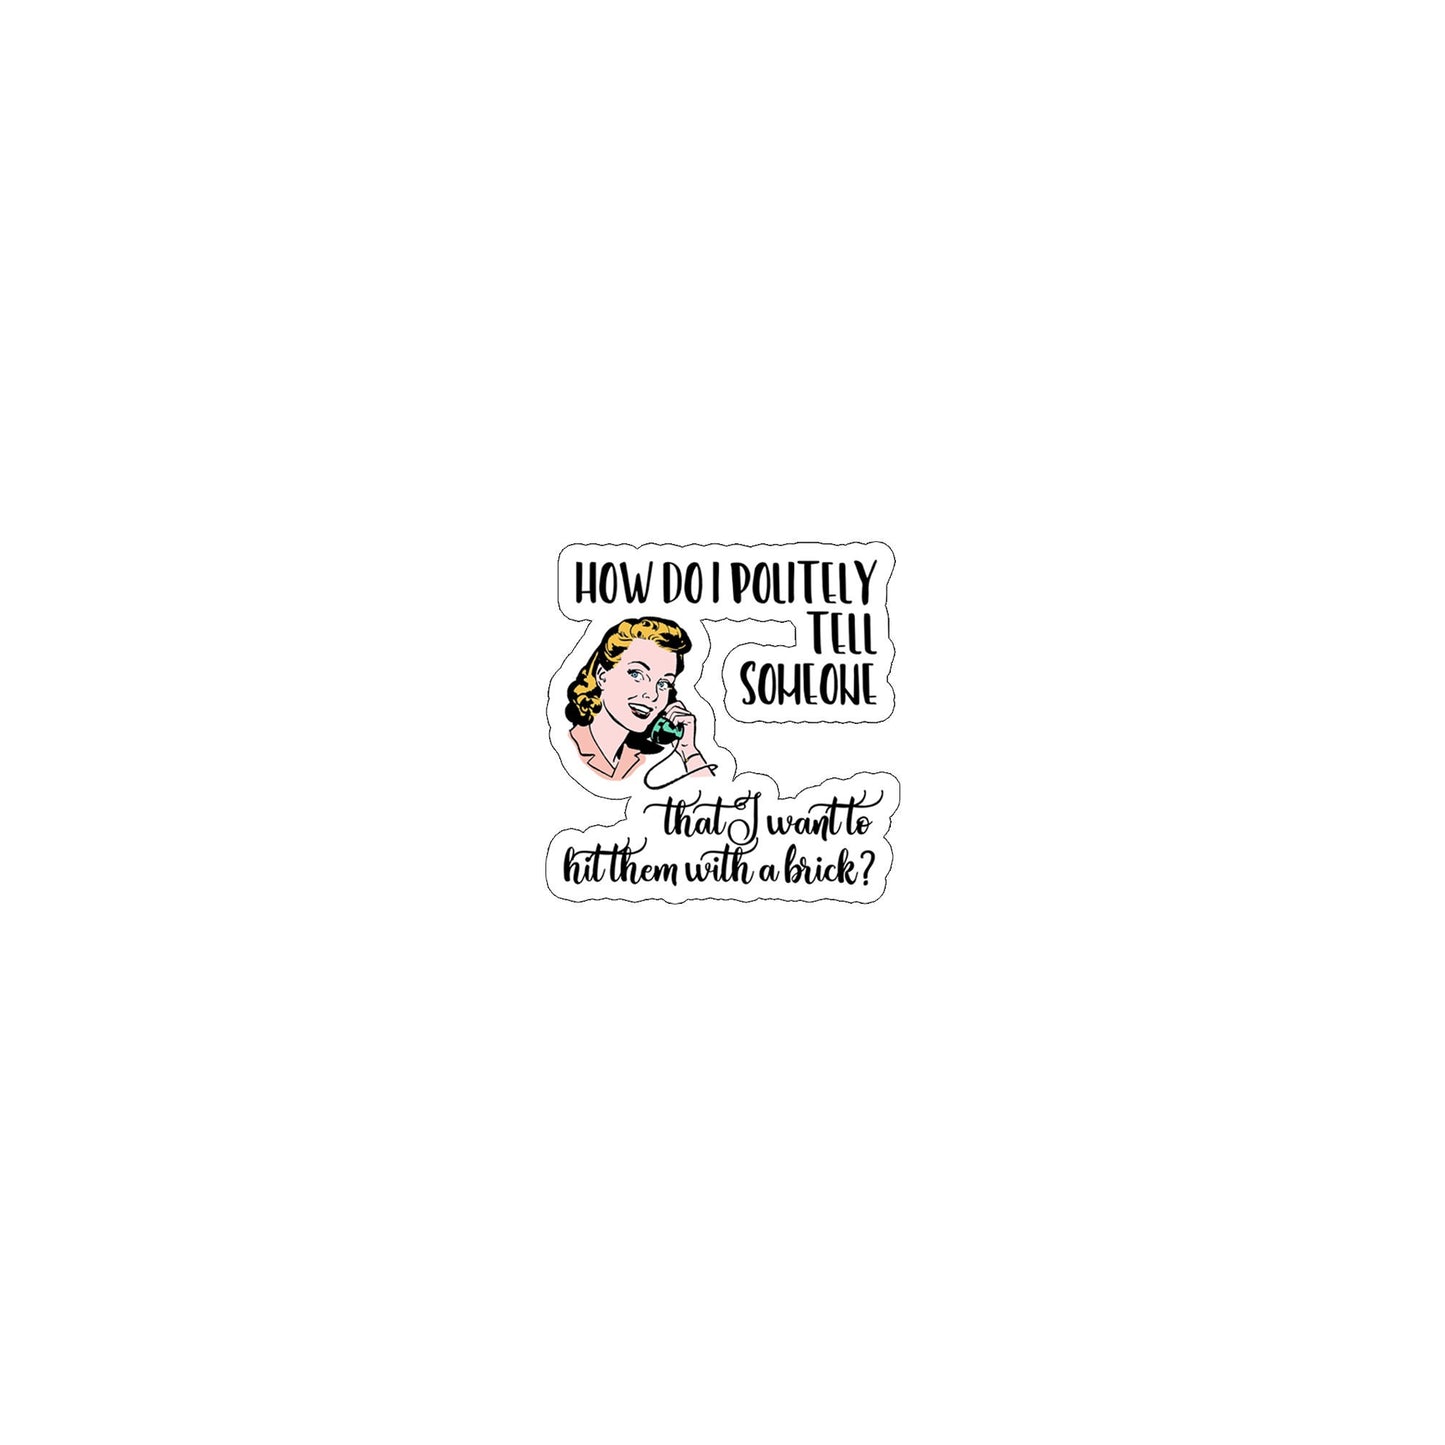 WITTY WOMEN WHO CAN'T BE NICE STICKERS